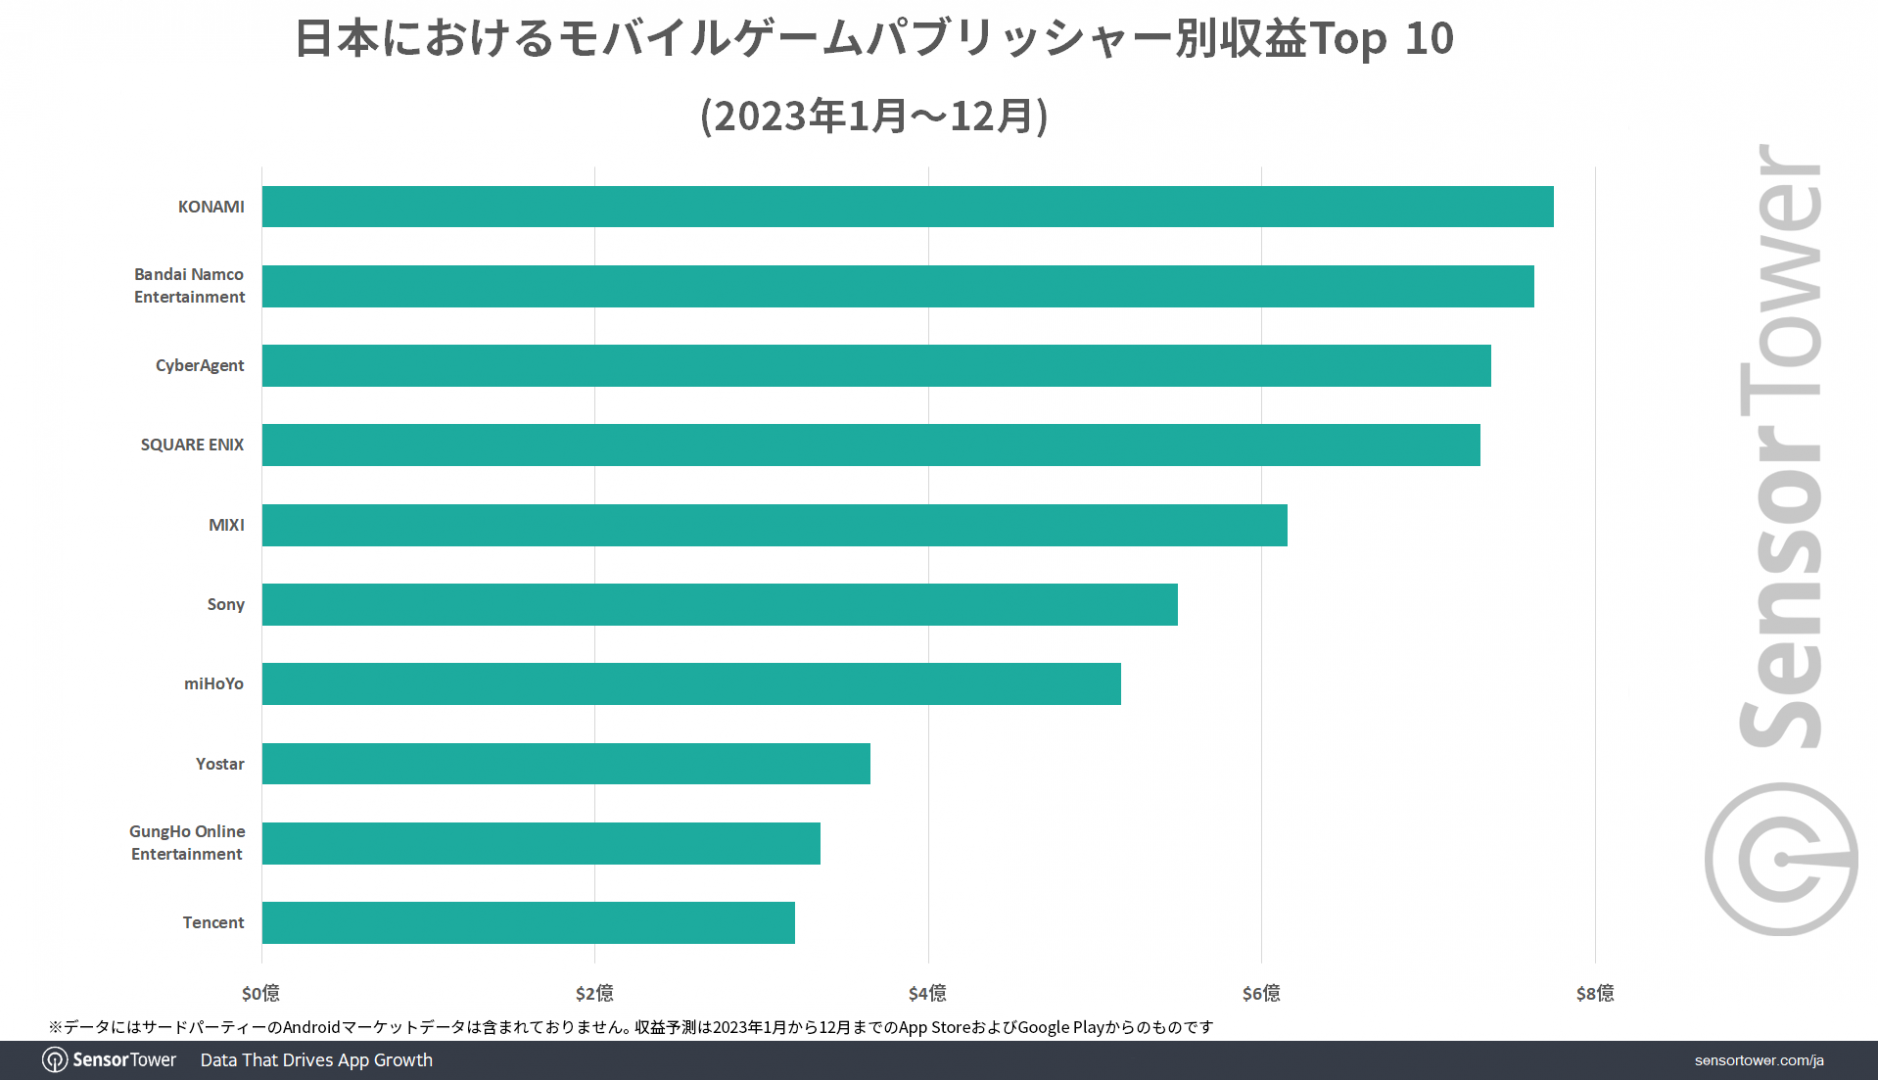 Top 10 publisher ranking in terms of total revenue (Sensor Tower)